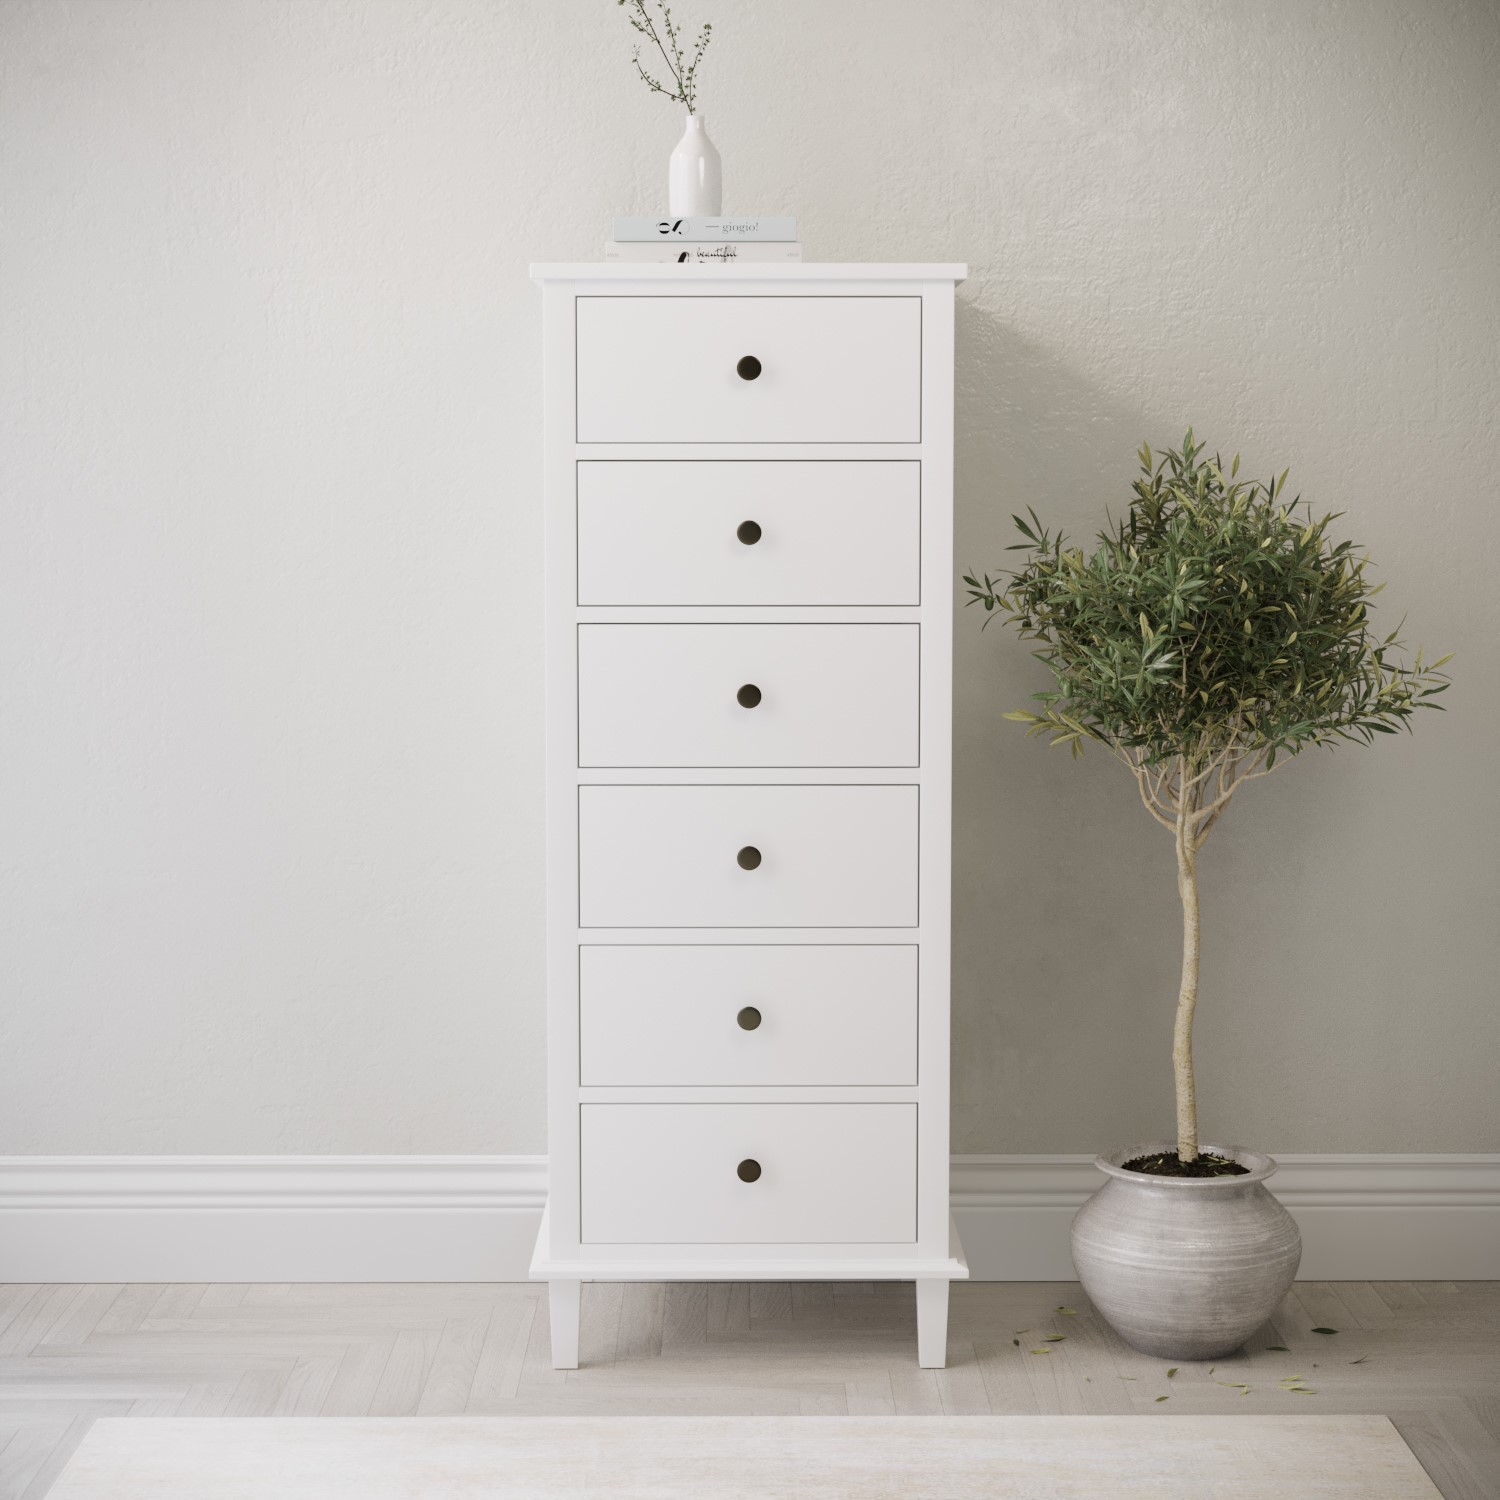 Photo of Tall narrow white wooden chest of 6 drawers - marlowe